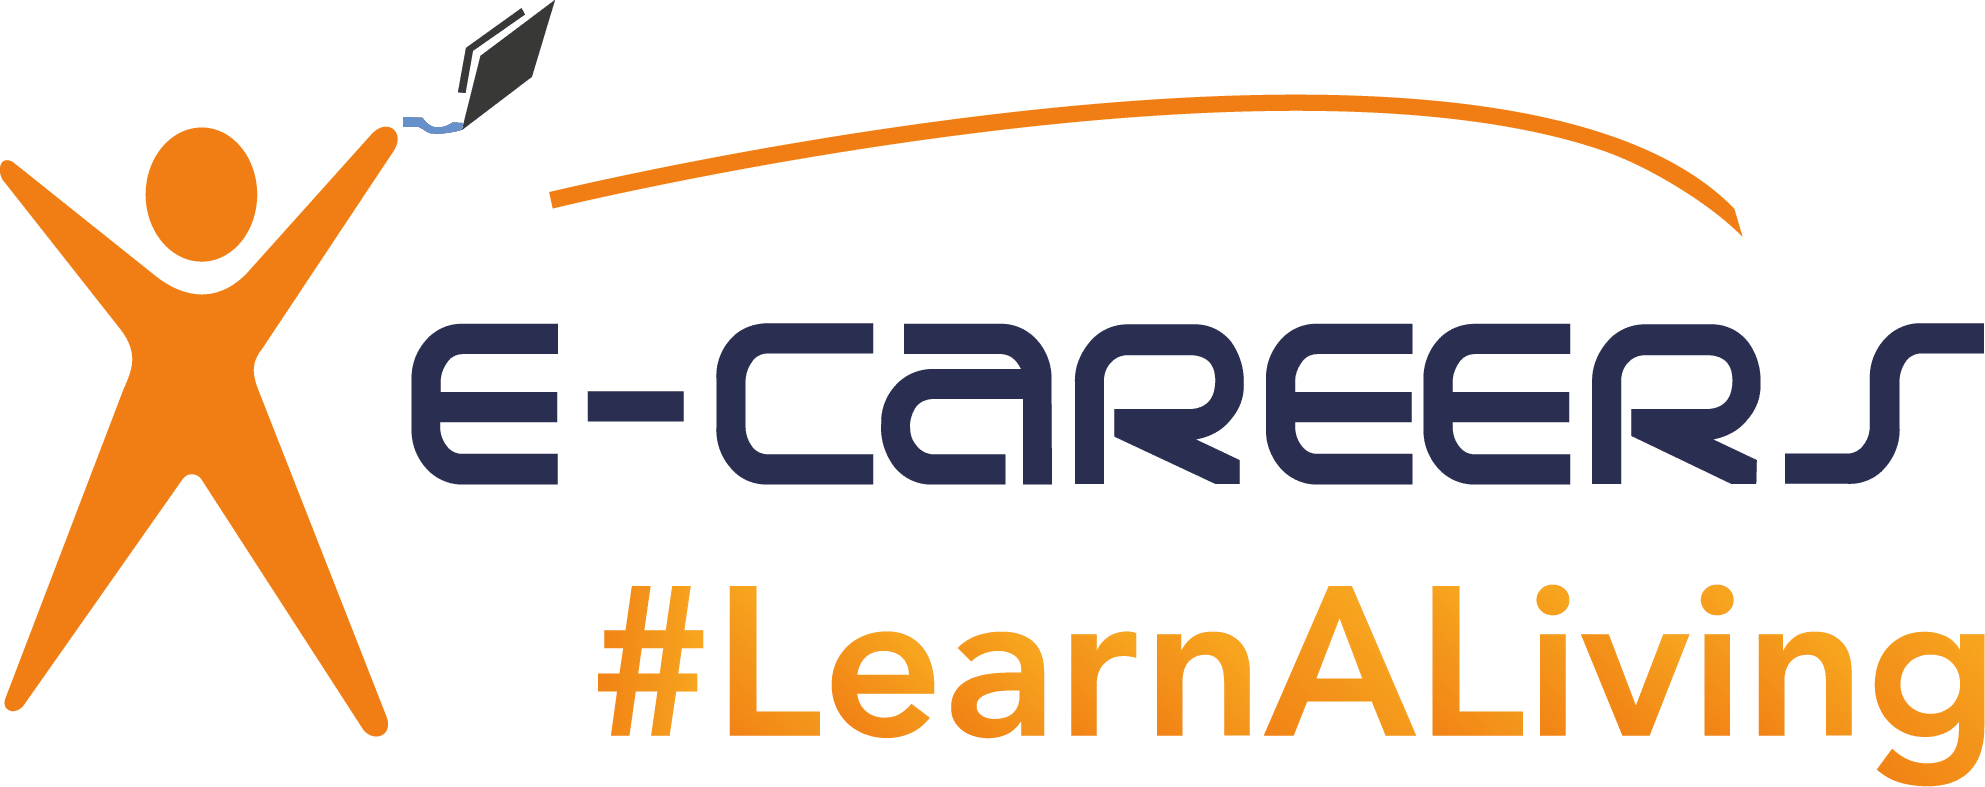 E-Careers #LearnALiving 